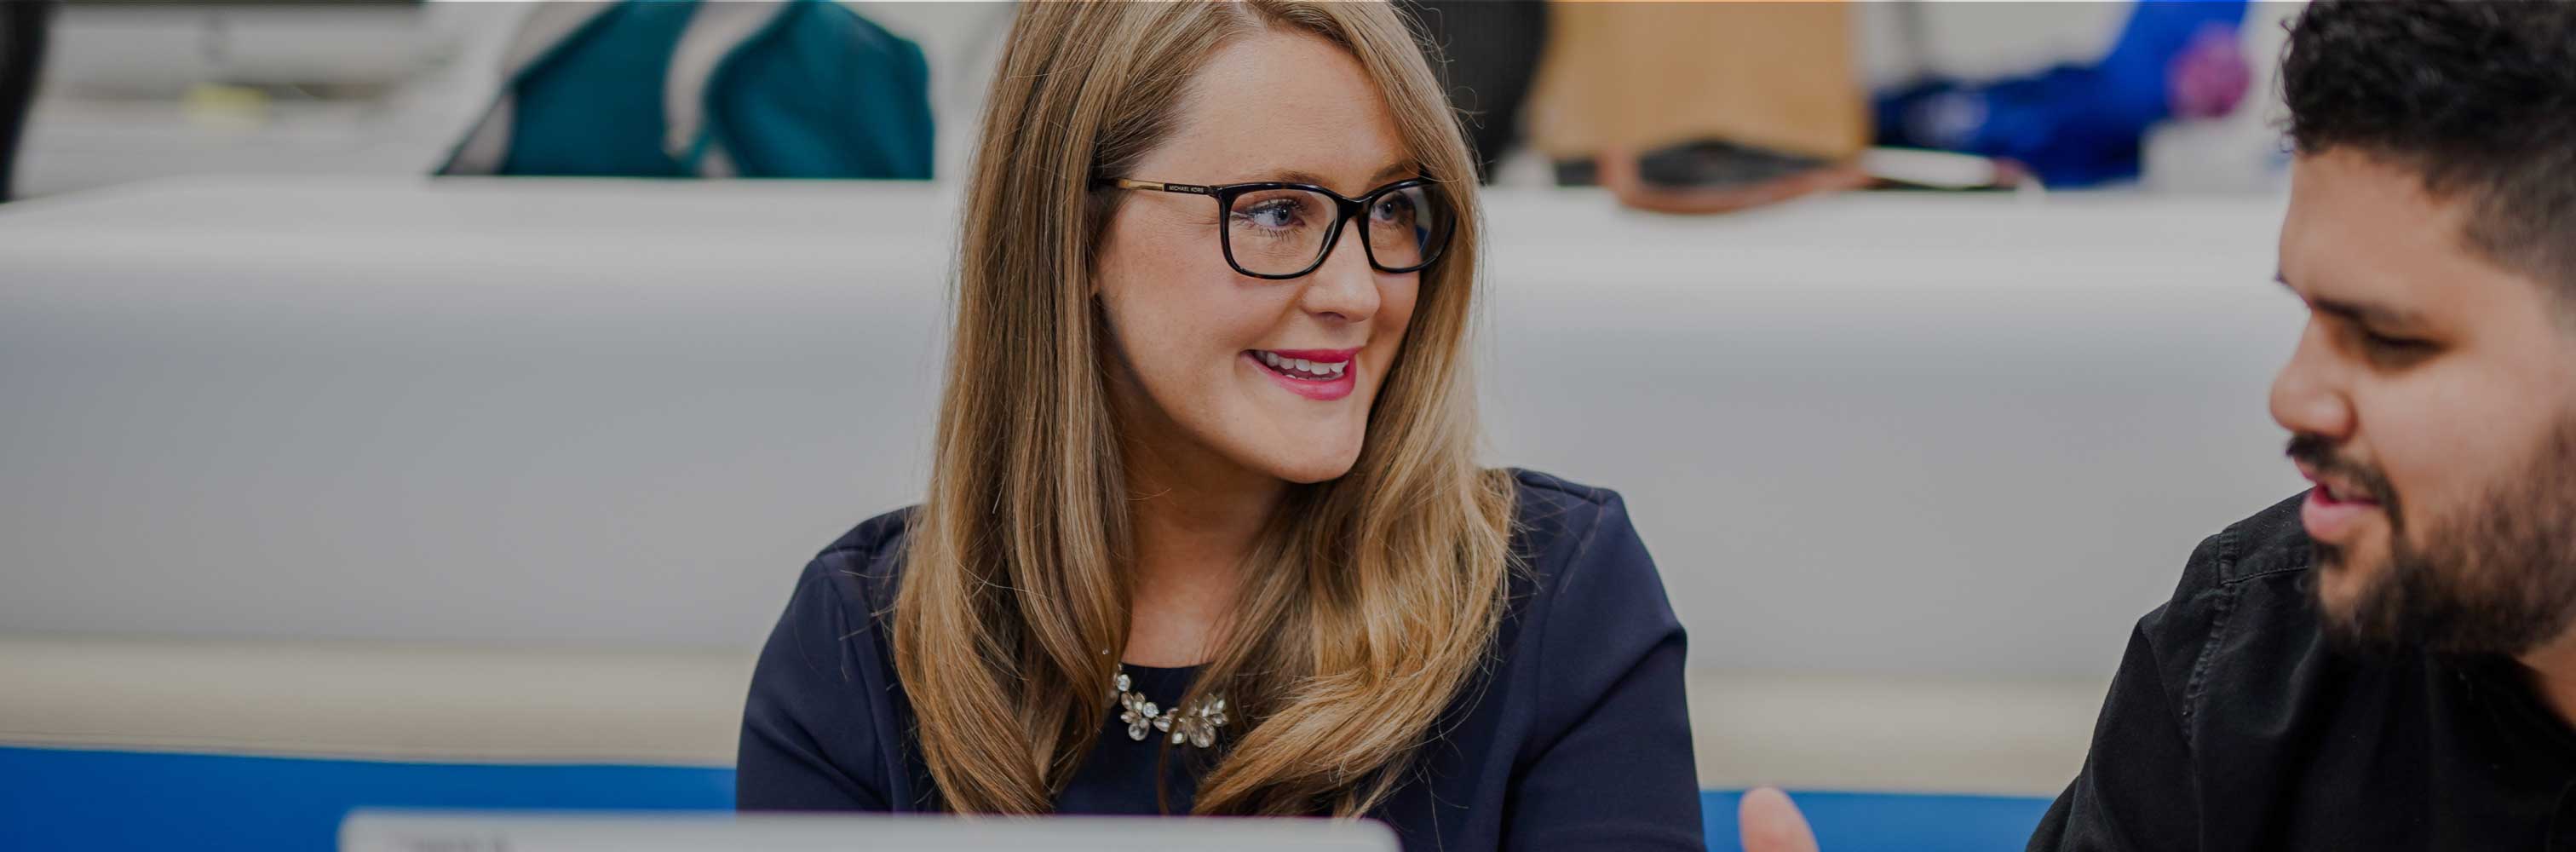 professional woman in glasses smiling during a meeting